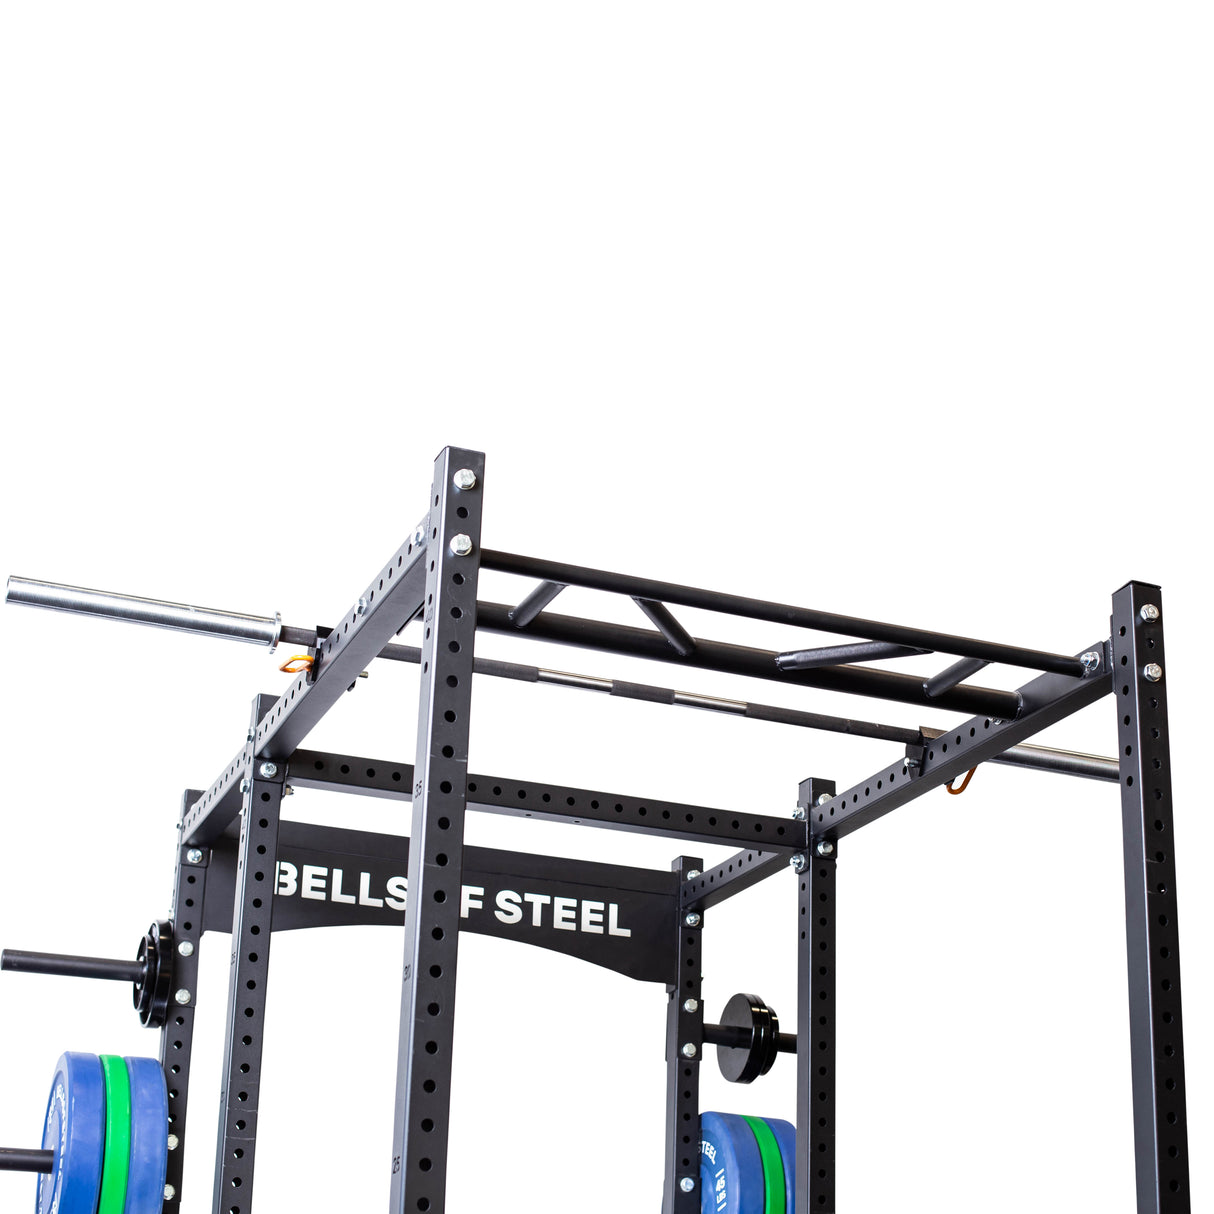 The Hydra Barbell Holder Rack Attachment is made to fit perfectly on true 3″ x 3″ tubing with 5/8″ holes racks